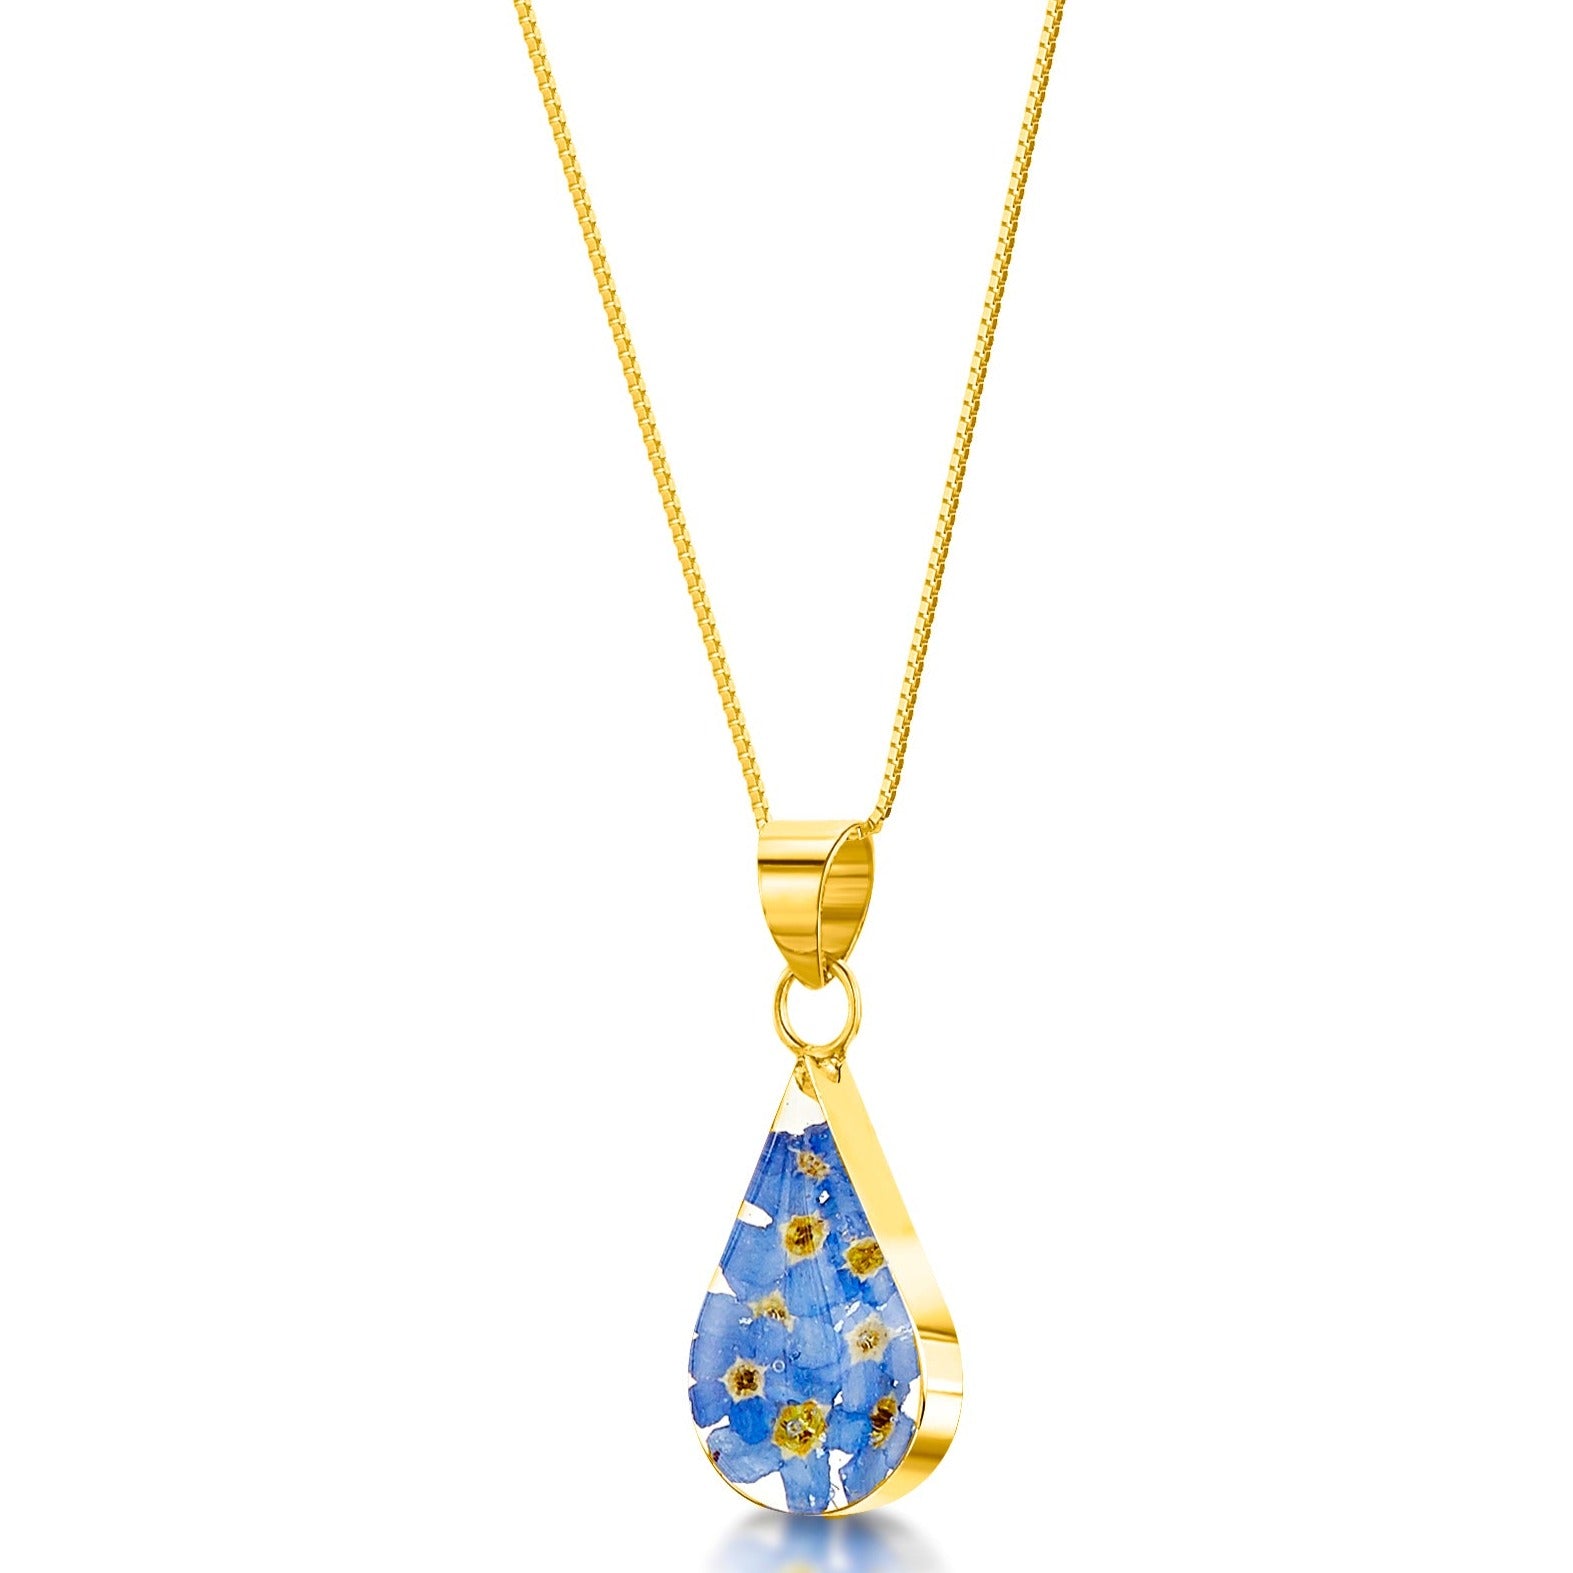 Sterling silver gold-plated teardrop pendant with real forget-me-not flowers set in resin. Hangs on an 18 inch adjustable sterling silver gold-plated chain.